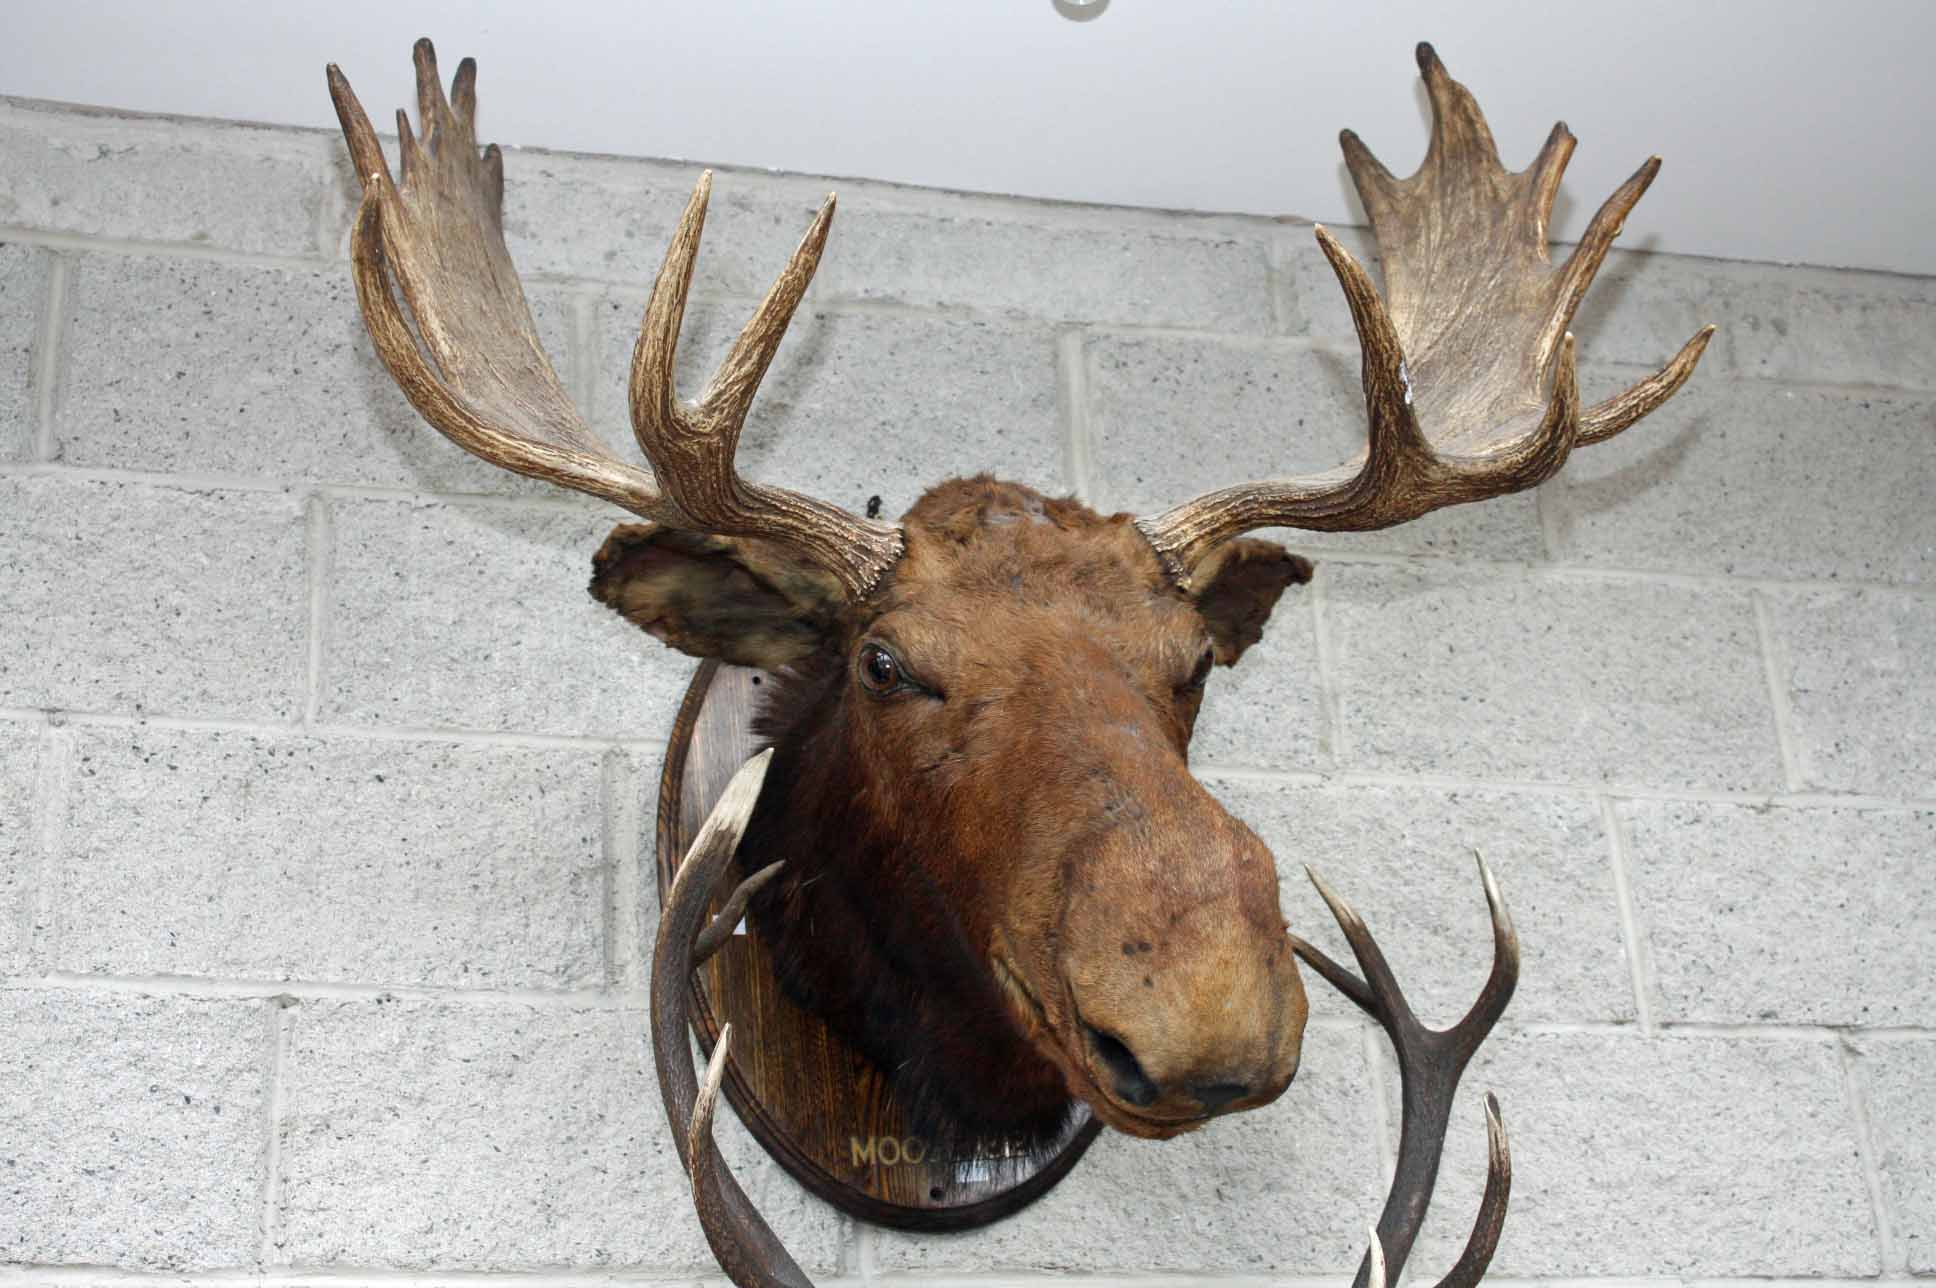 TAXIDERMY;
A very large moose head and antlers, stuffed and mounted on an oval oak panel,